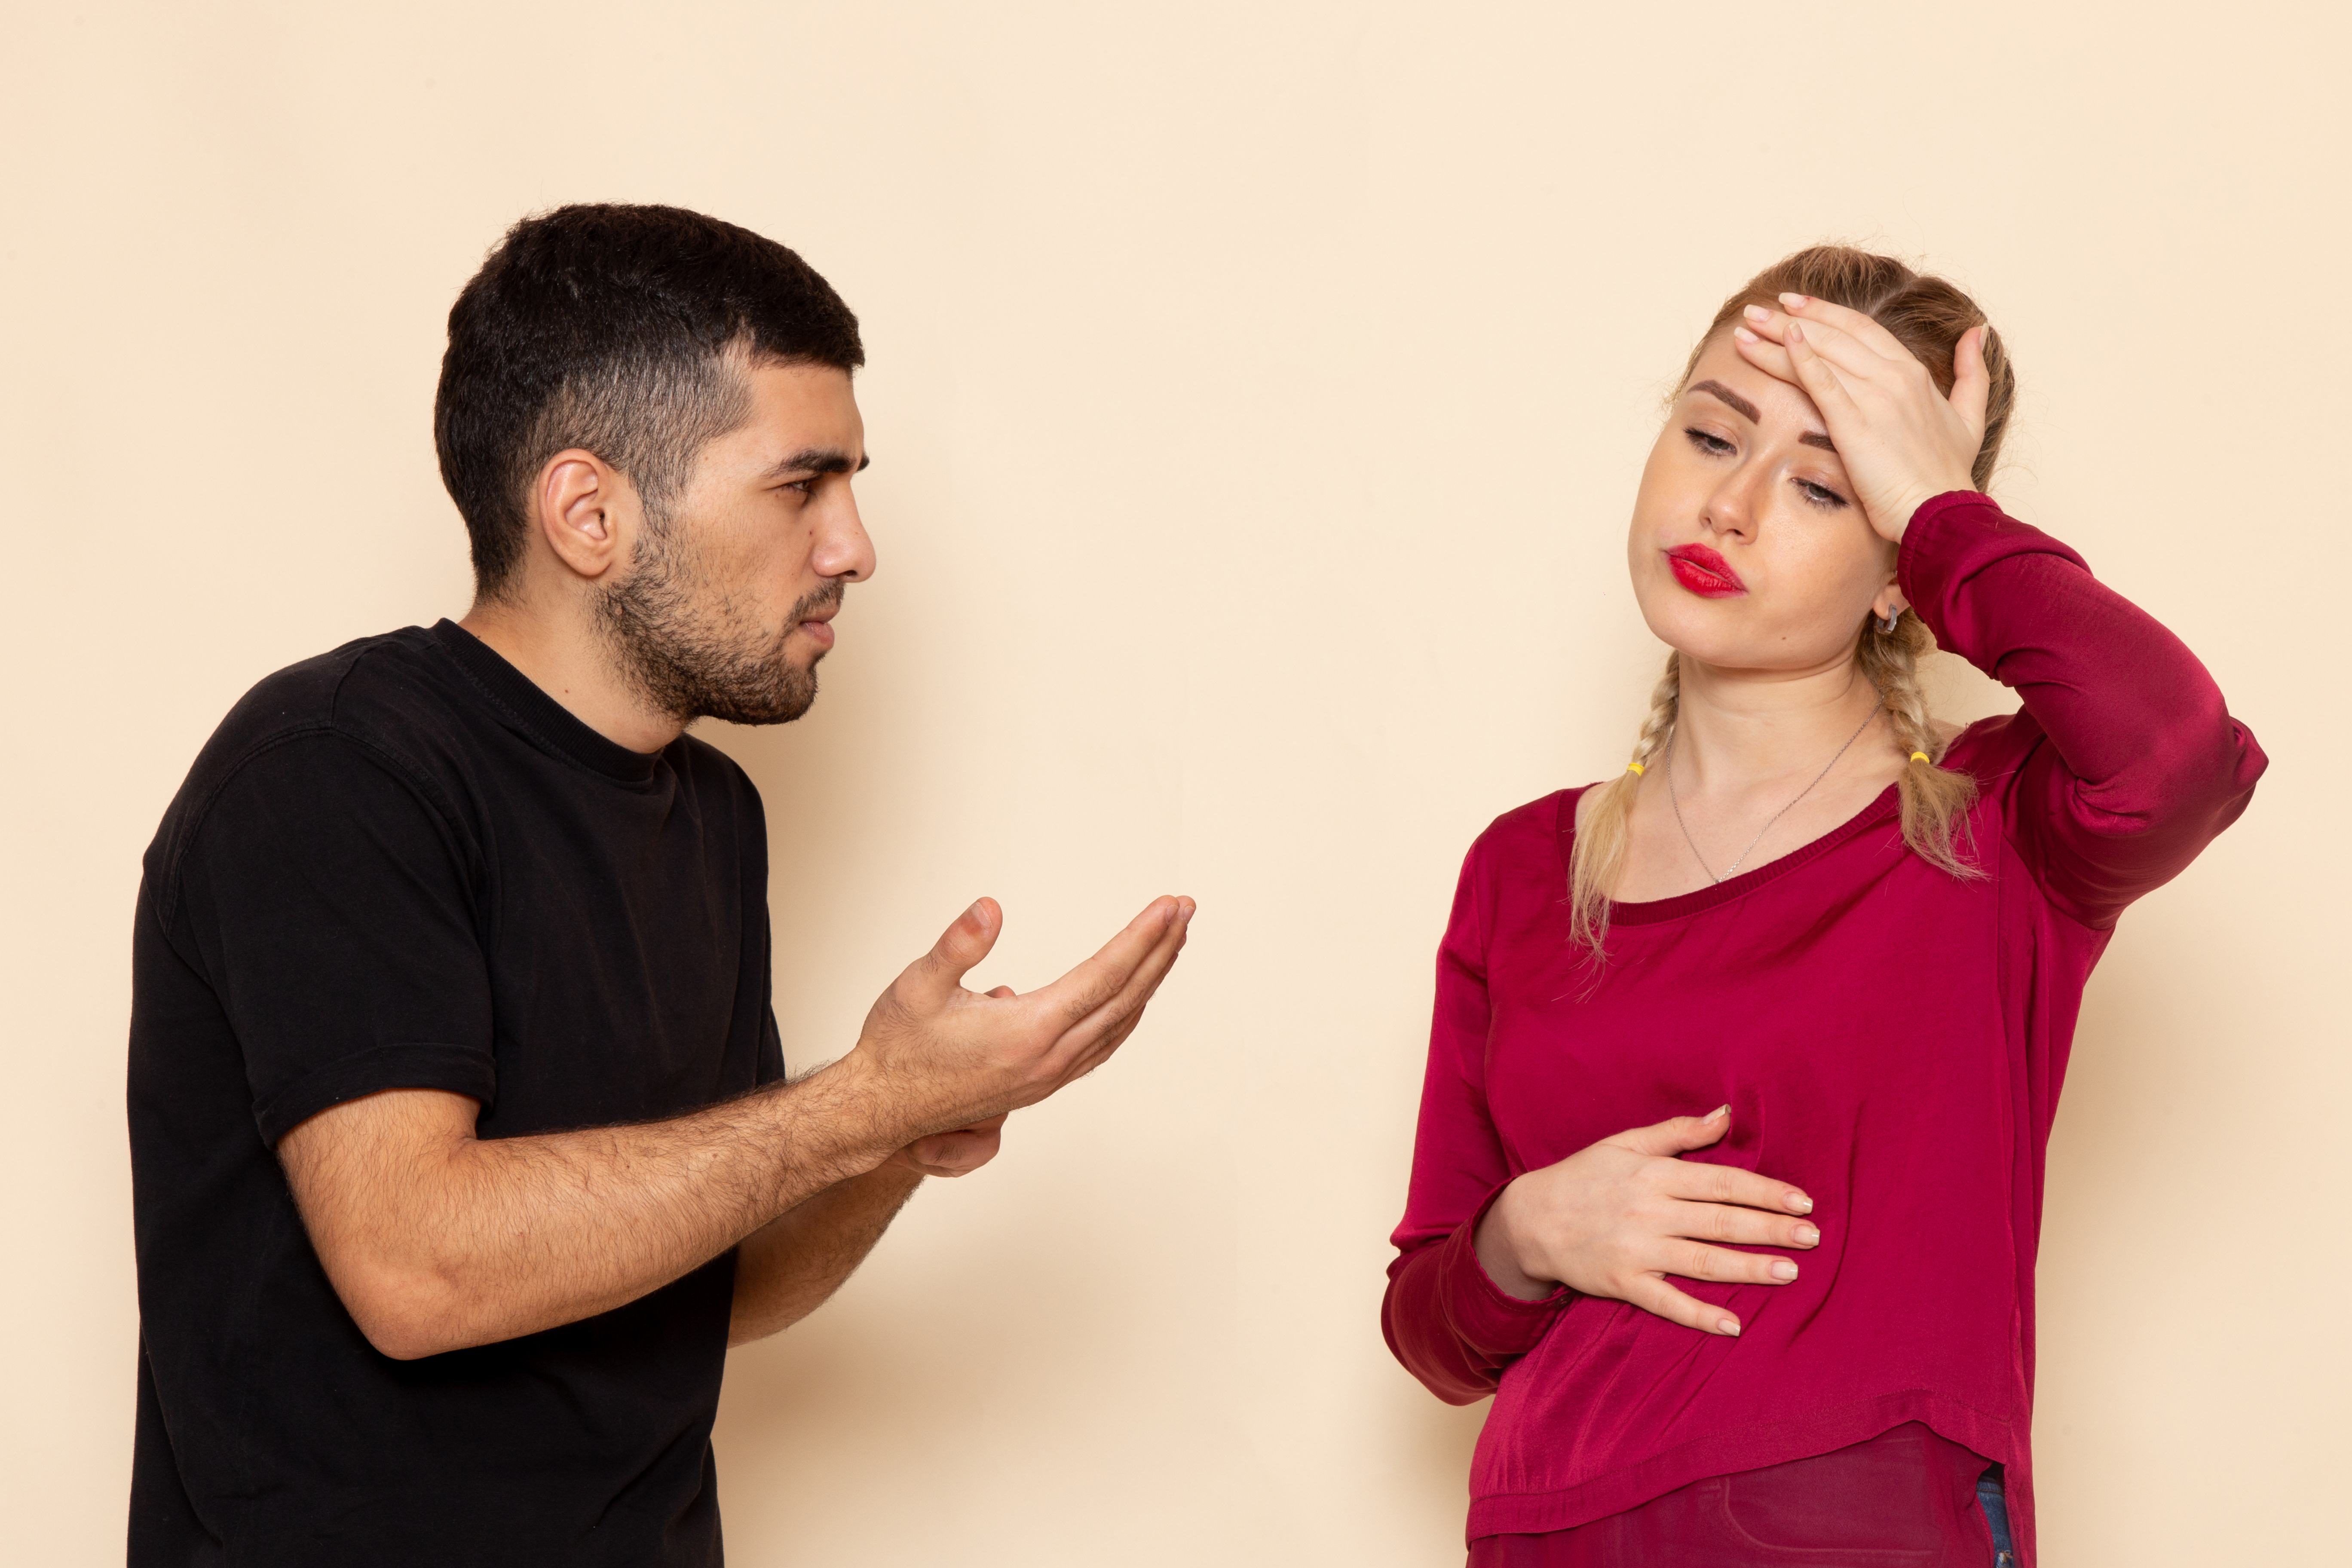 Man gesturing to a woman whose hand is on her forehead | Source: Freepik